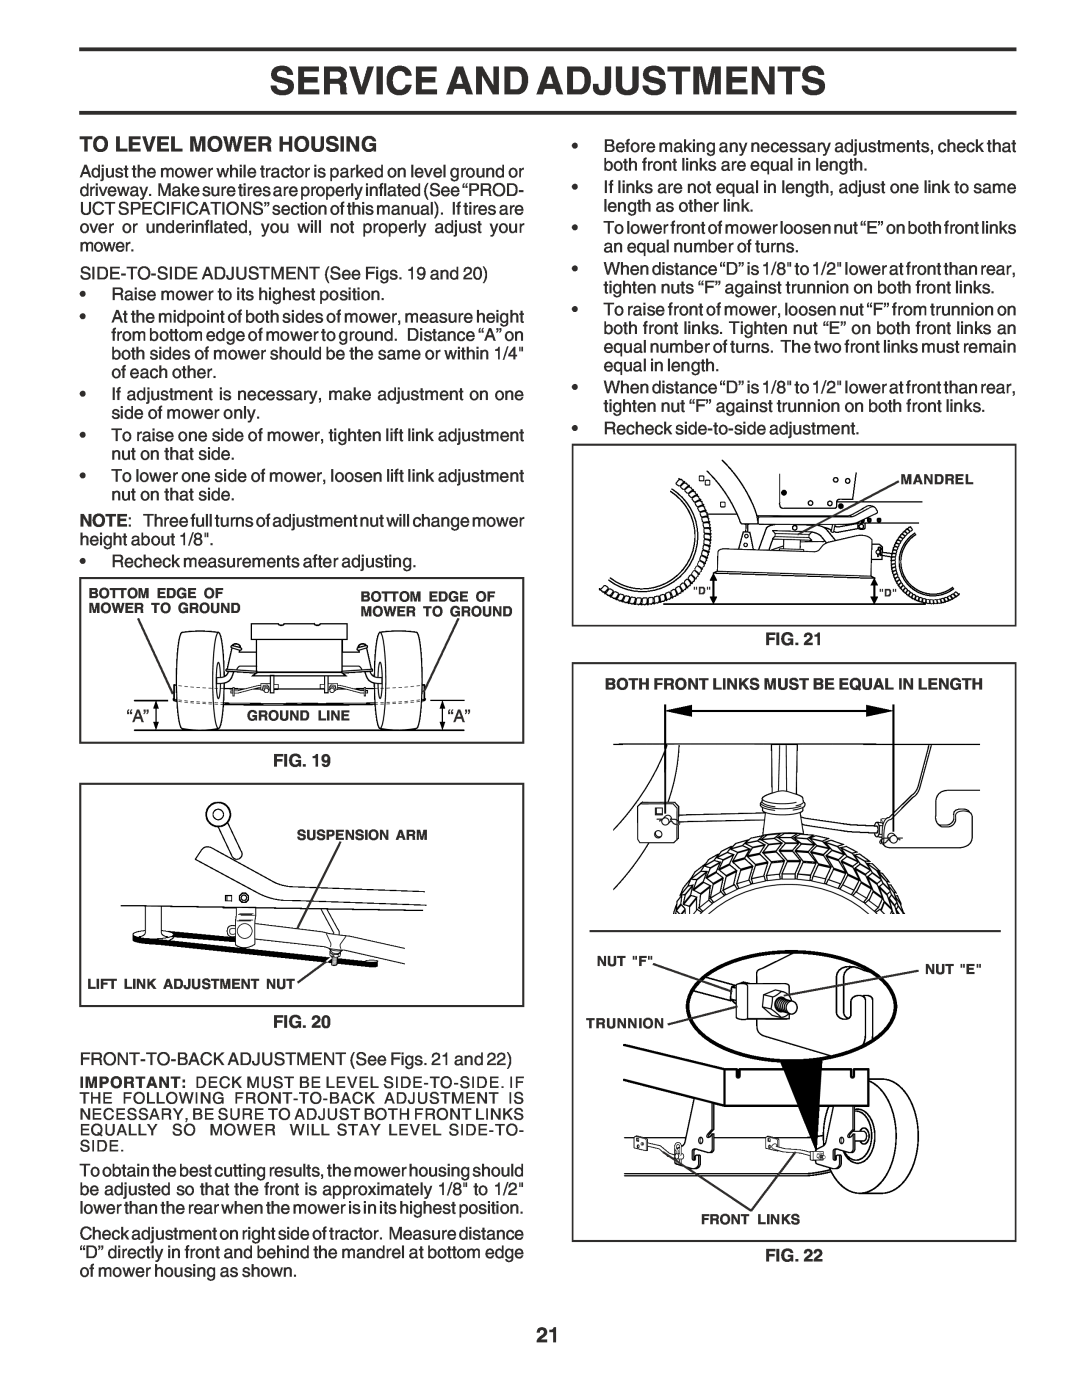 Poulan 182770 owner manual To Level Mower Housing, Service And Adjustments 